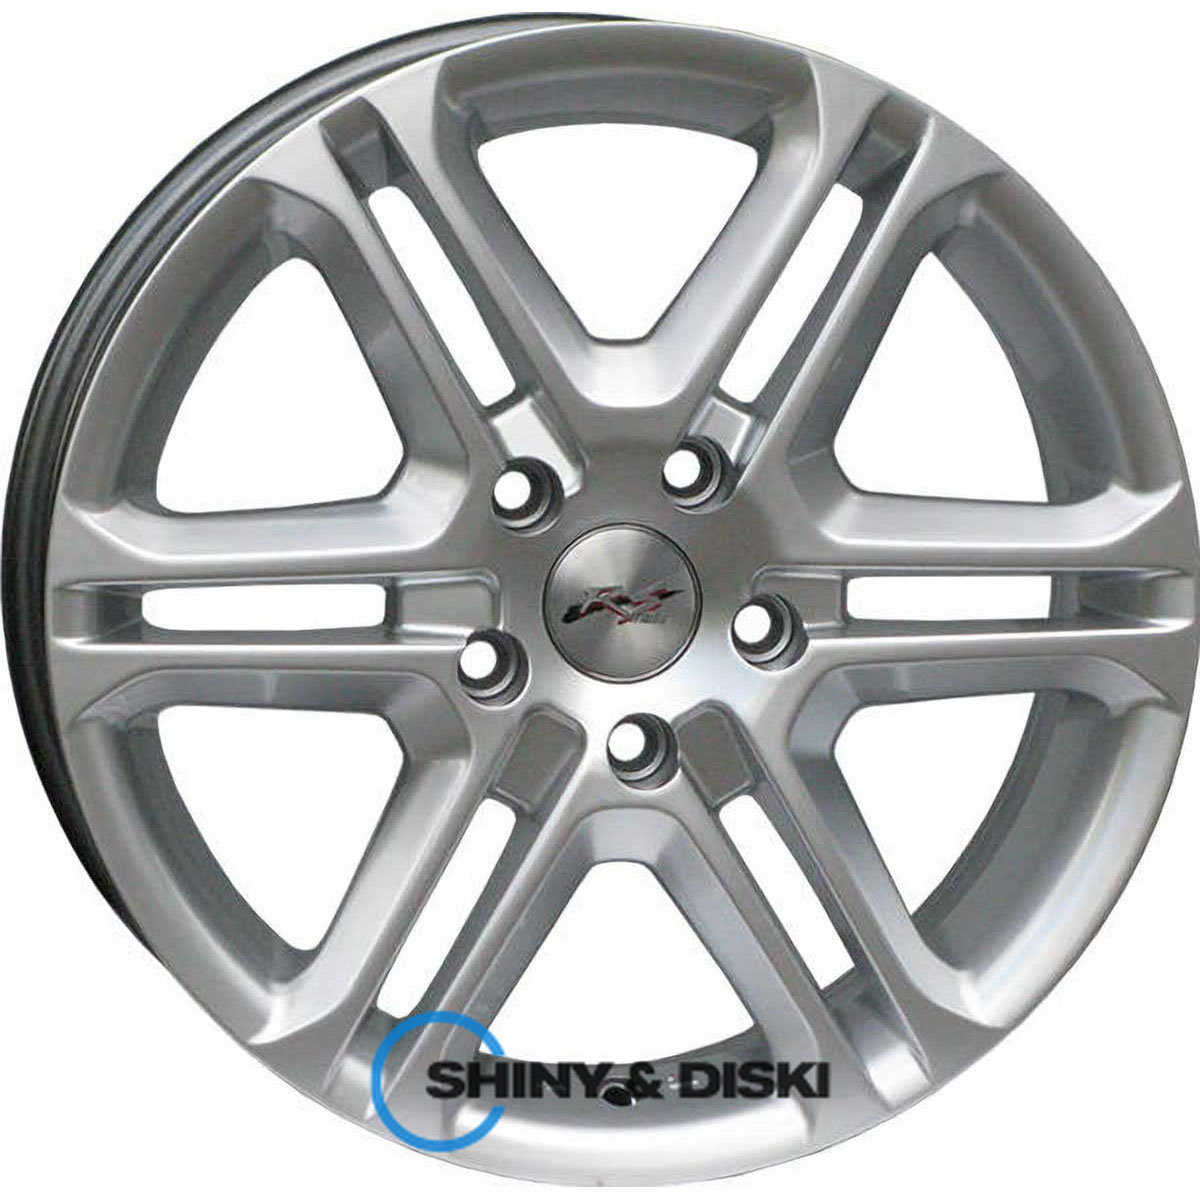 rs tuning 789 hs r16 w6.5 pcd5x114.3 et45 dia67.1